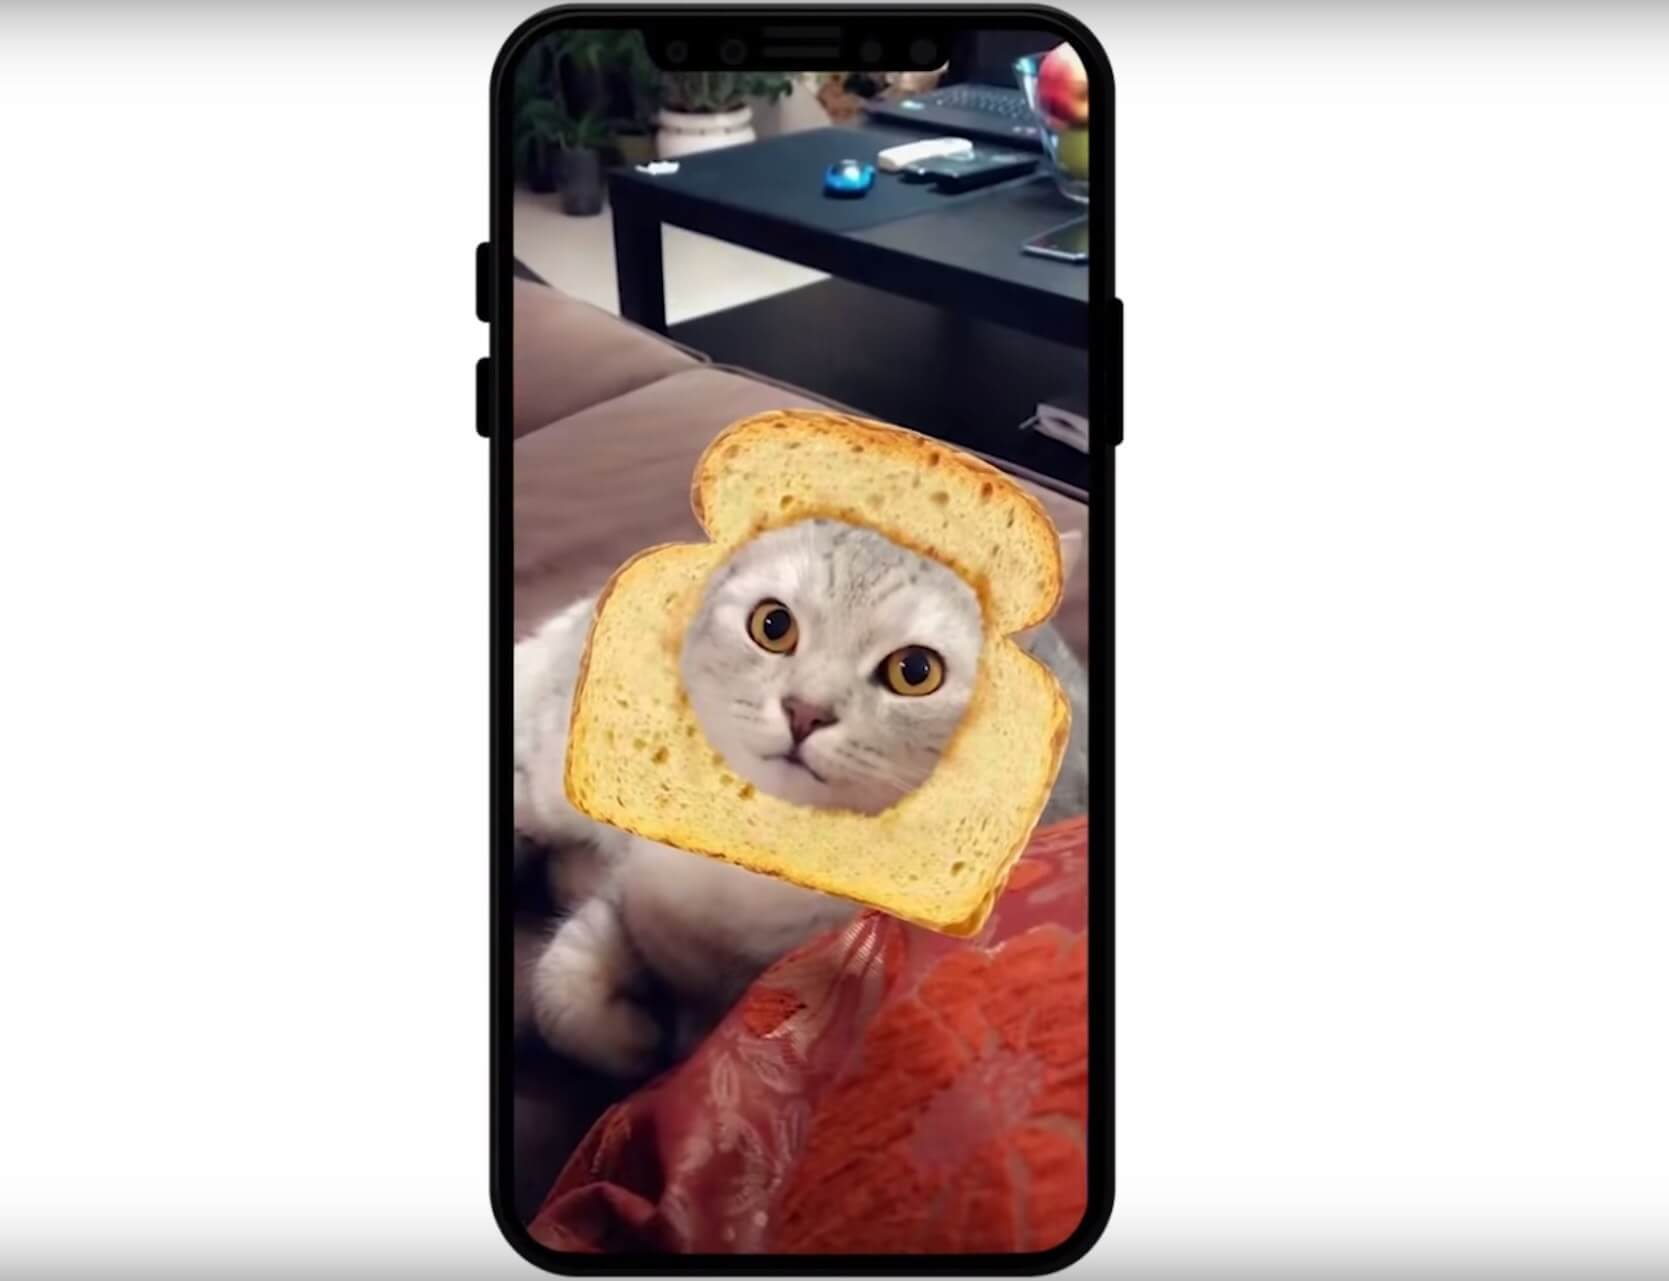 Snapchat tries to attract more users by adding cat lenses